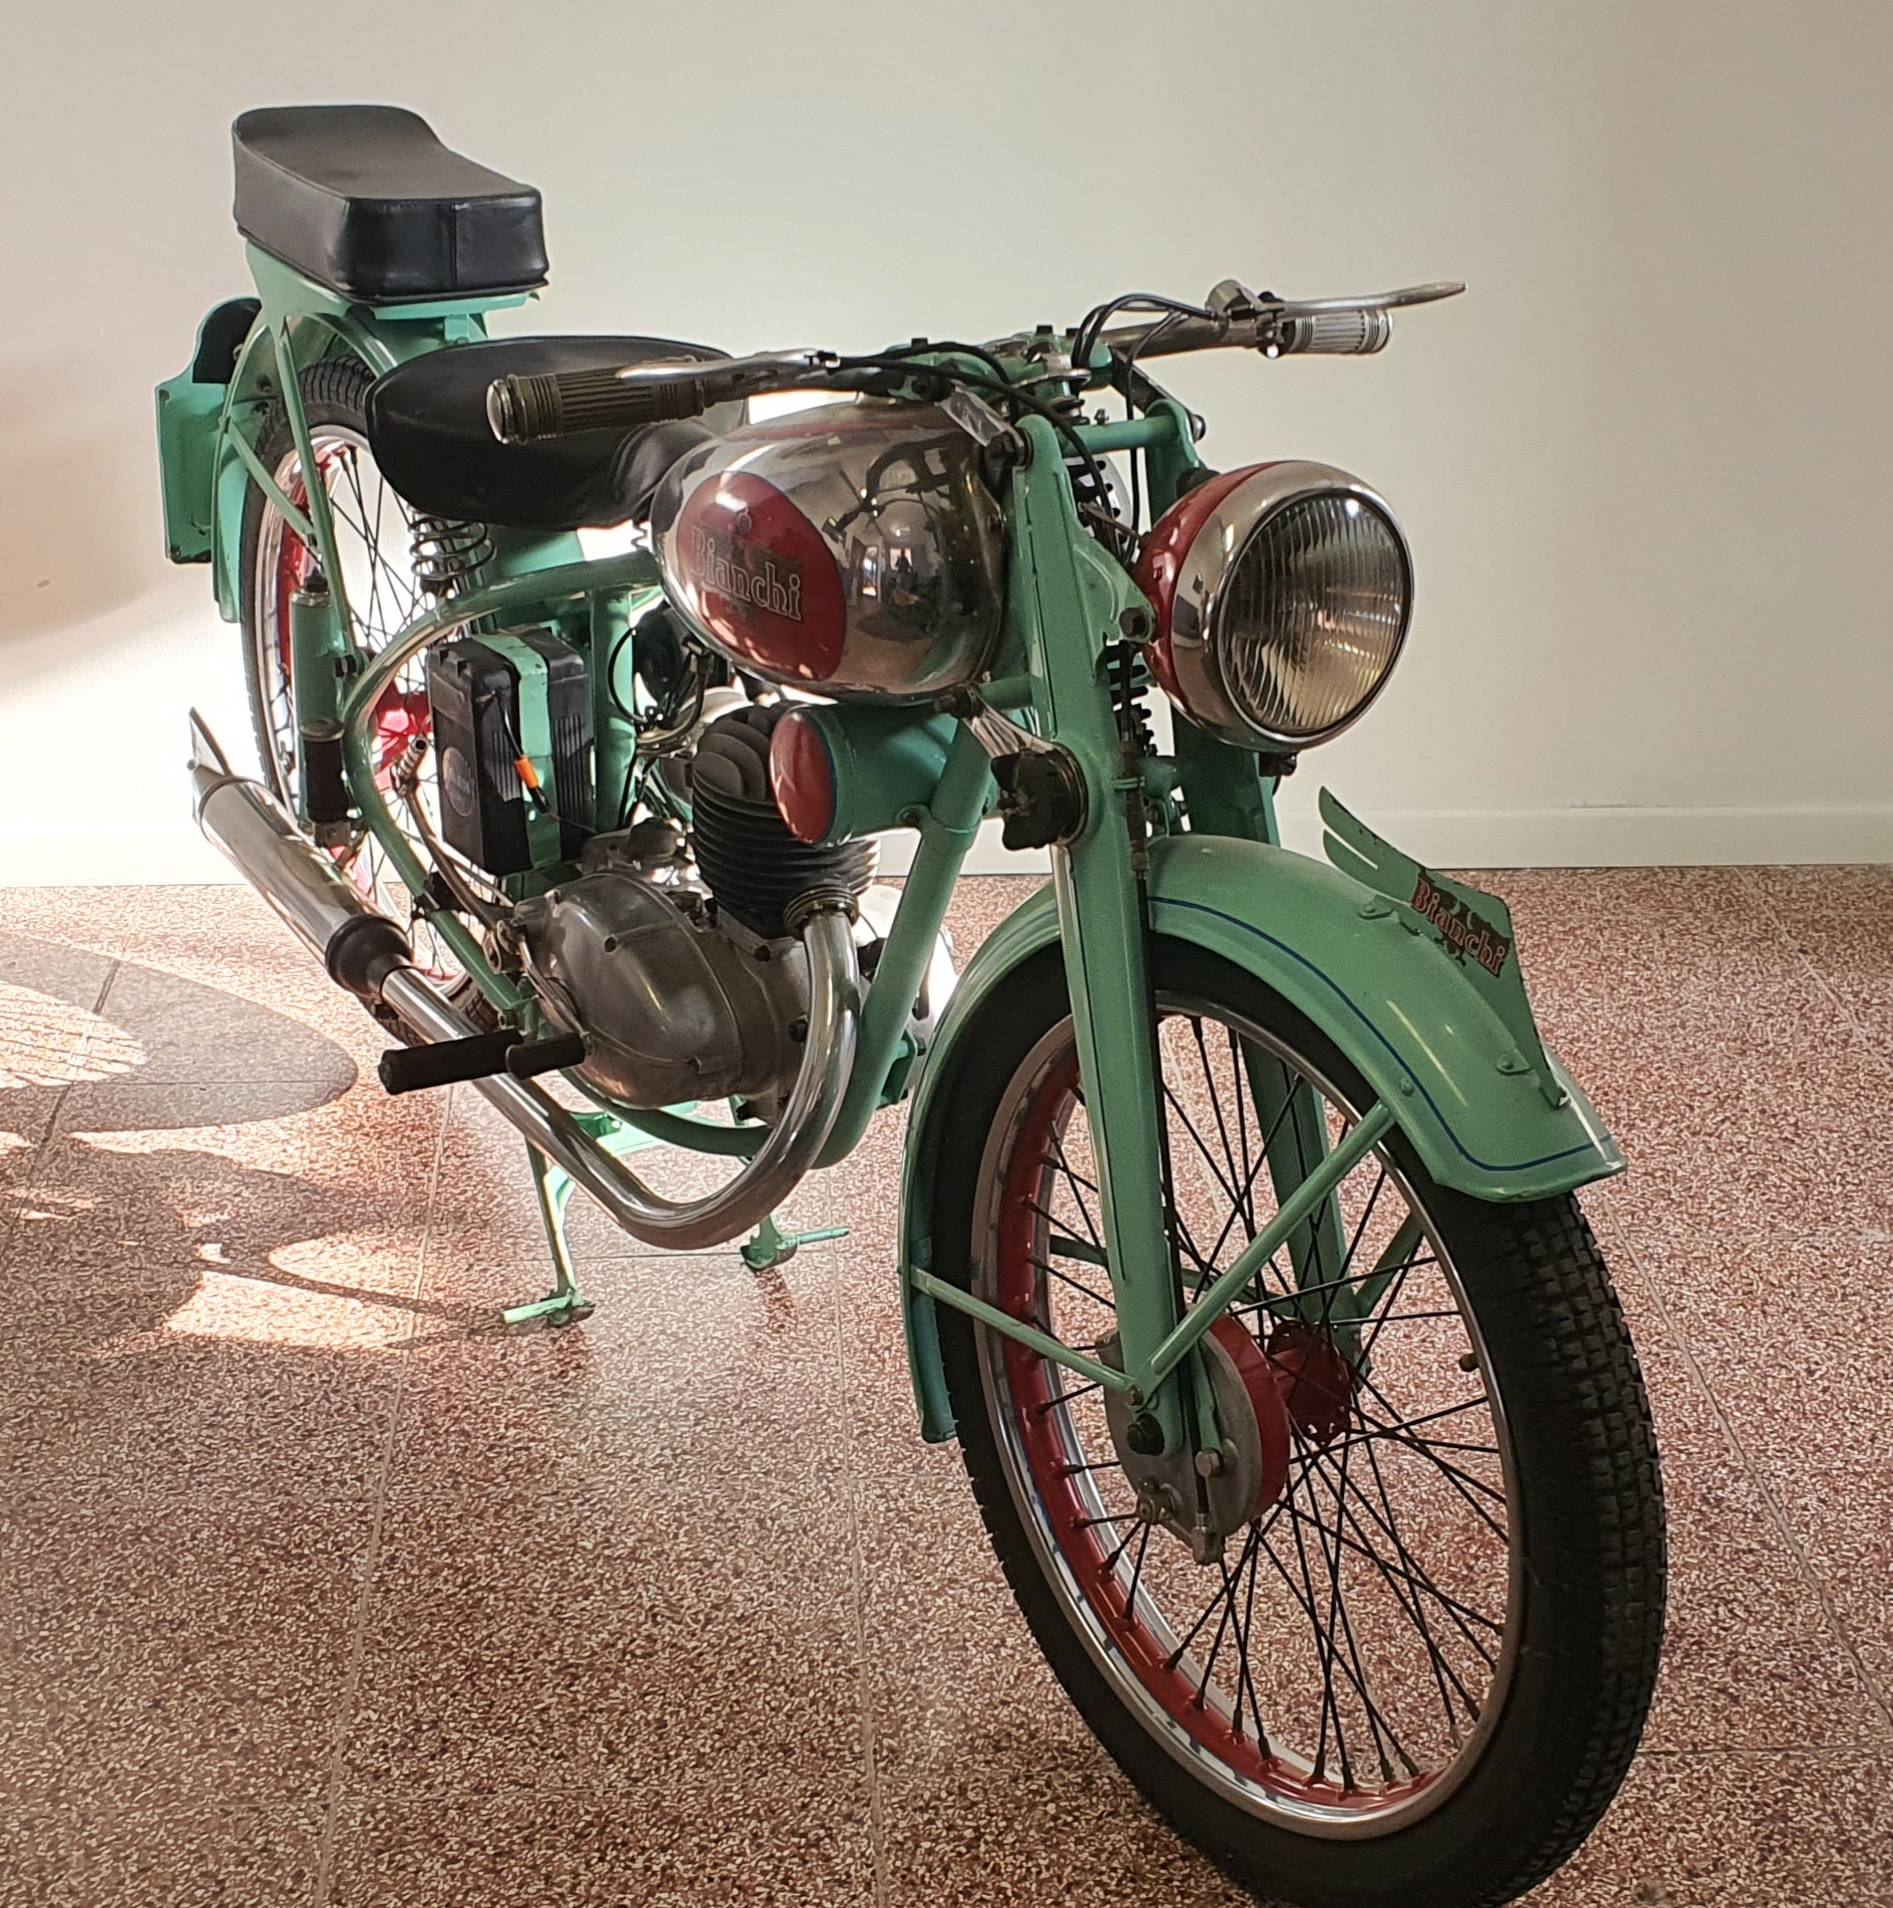 Bianchina Motorcycle, 1951 For Sale at 1stdibs